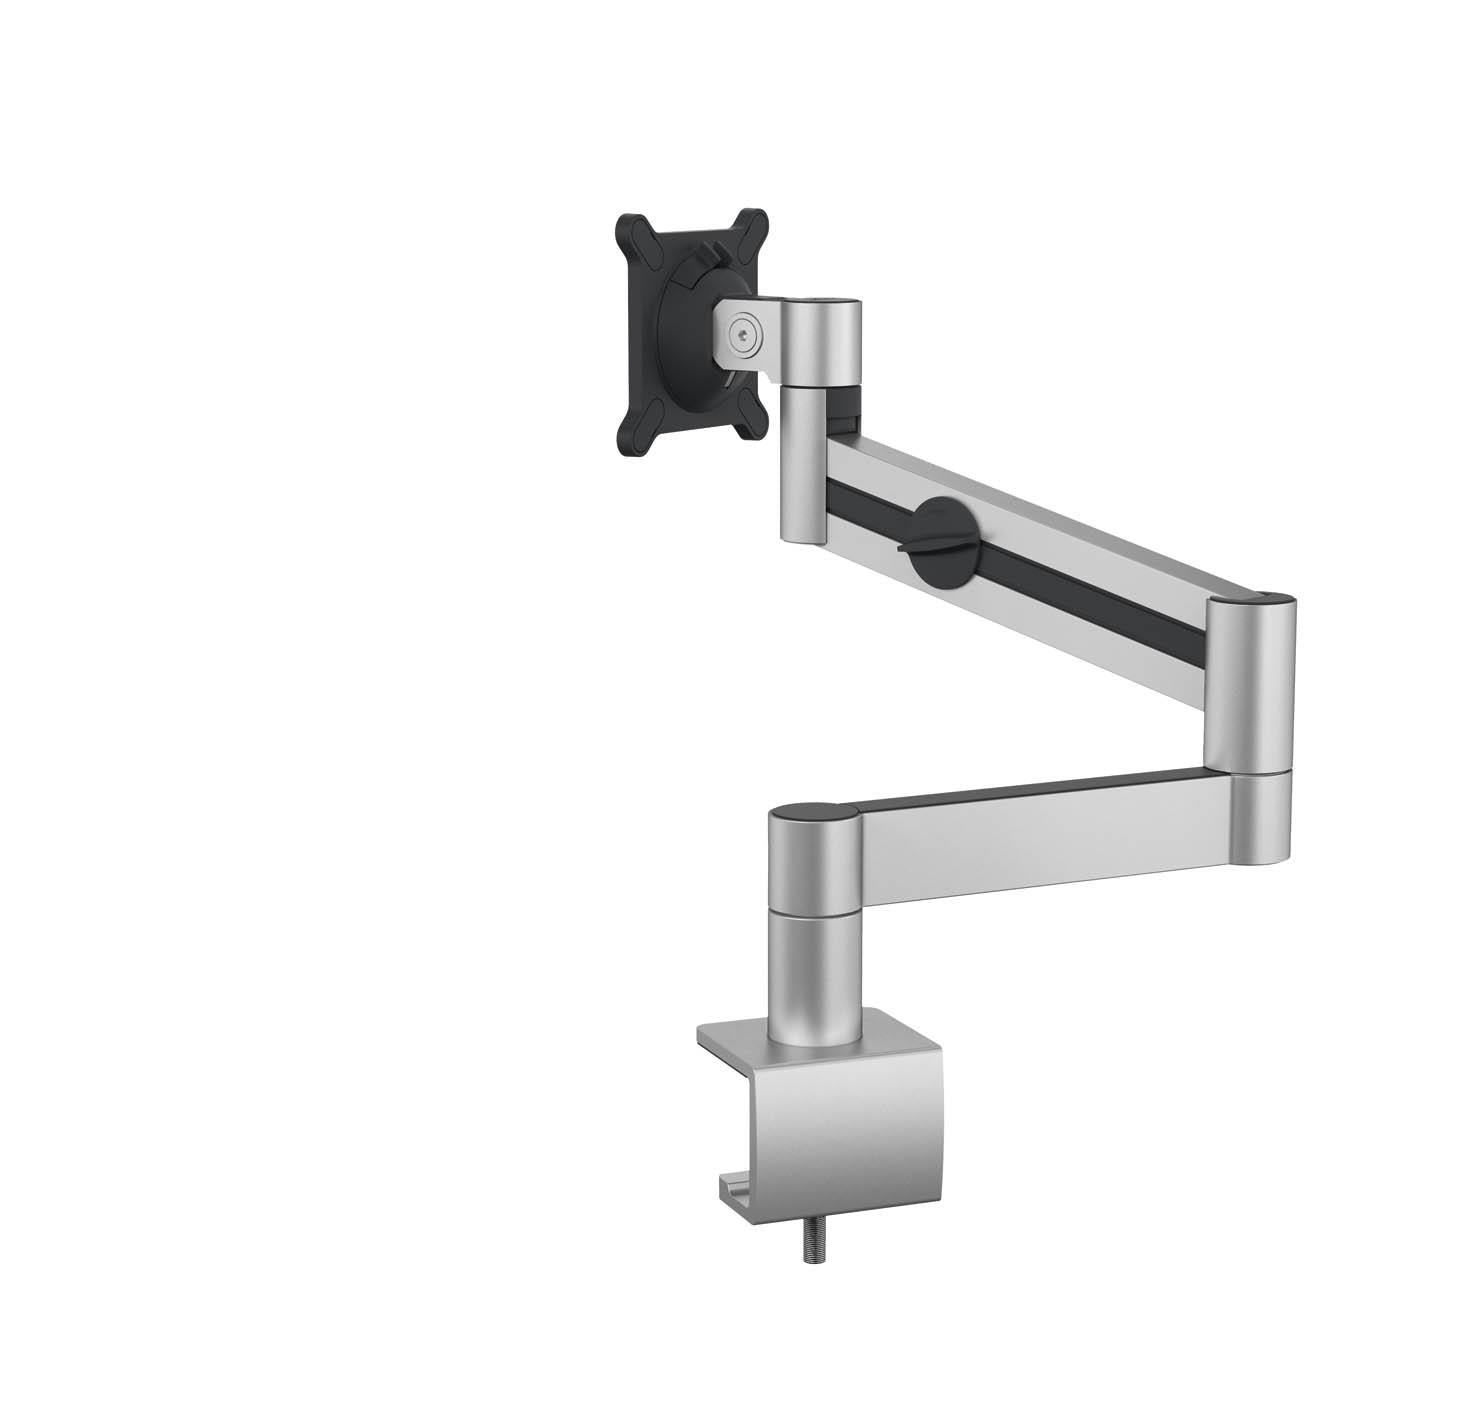 Durable Monitor Mount PRO with Arm for 1 Screen | Desk Clamp Attachment